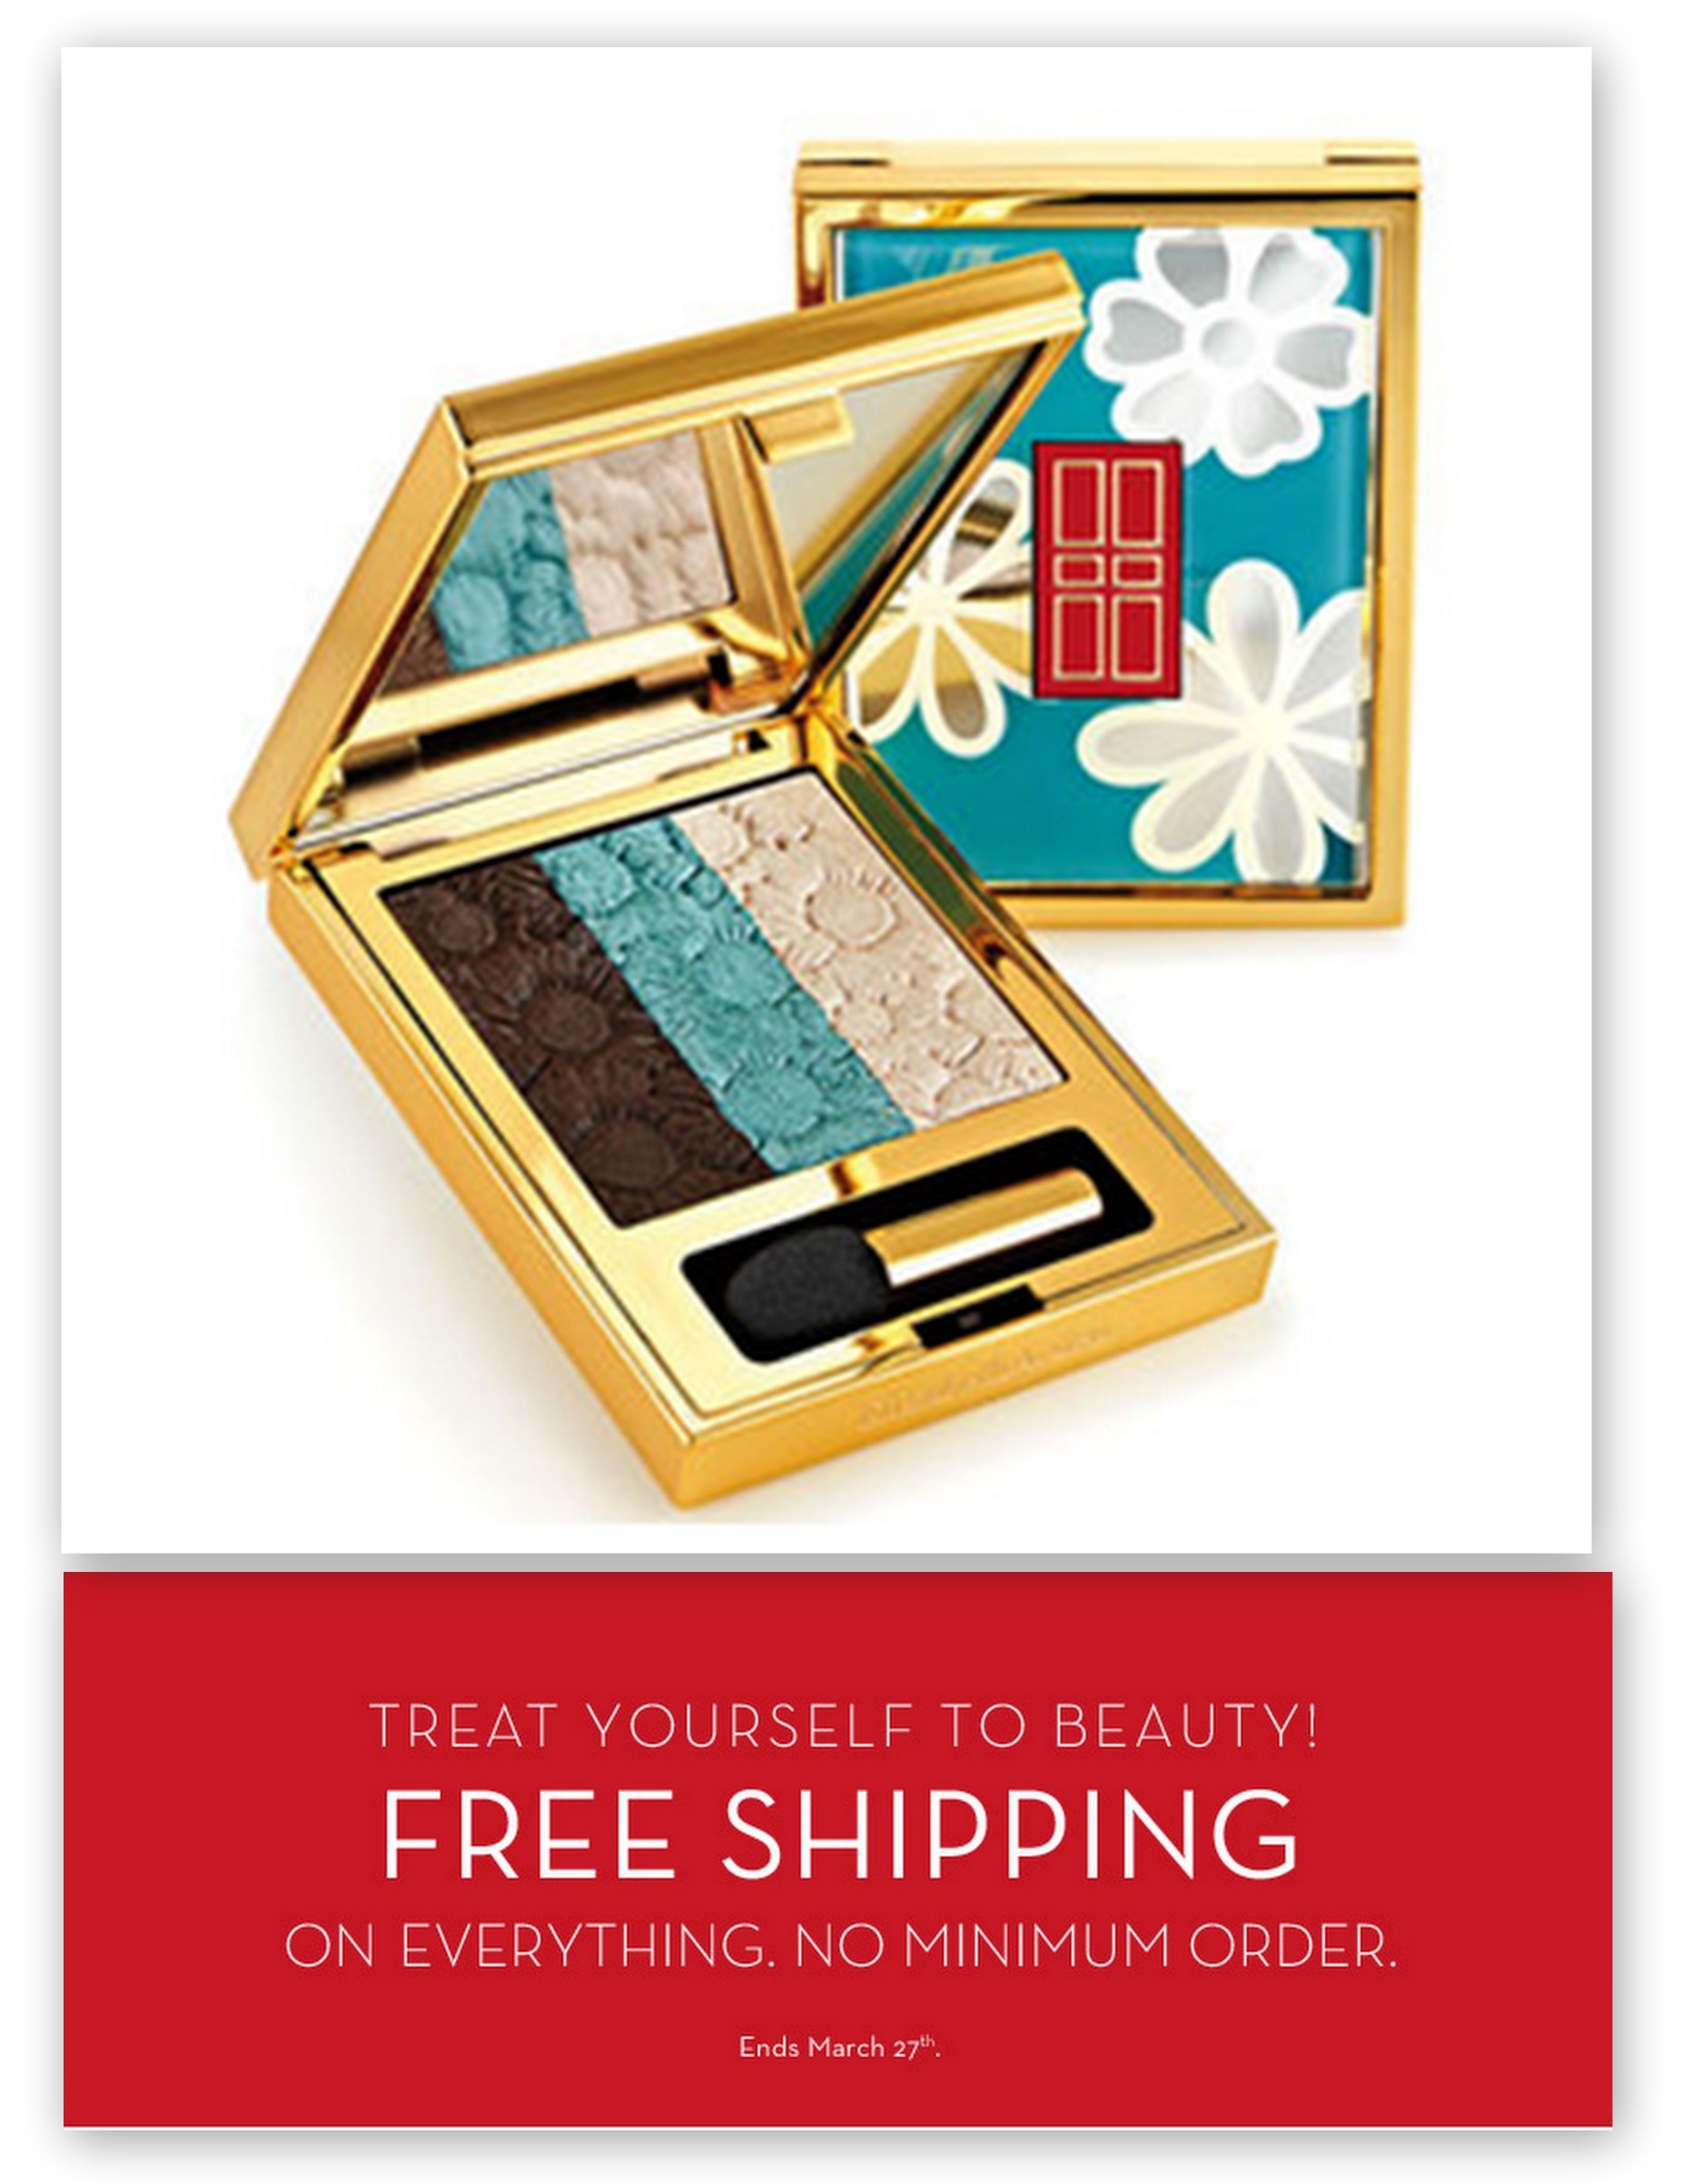 Elizabeth Arden: FREE Shipping and FREE Gifts With Qualifying Purchase